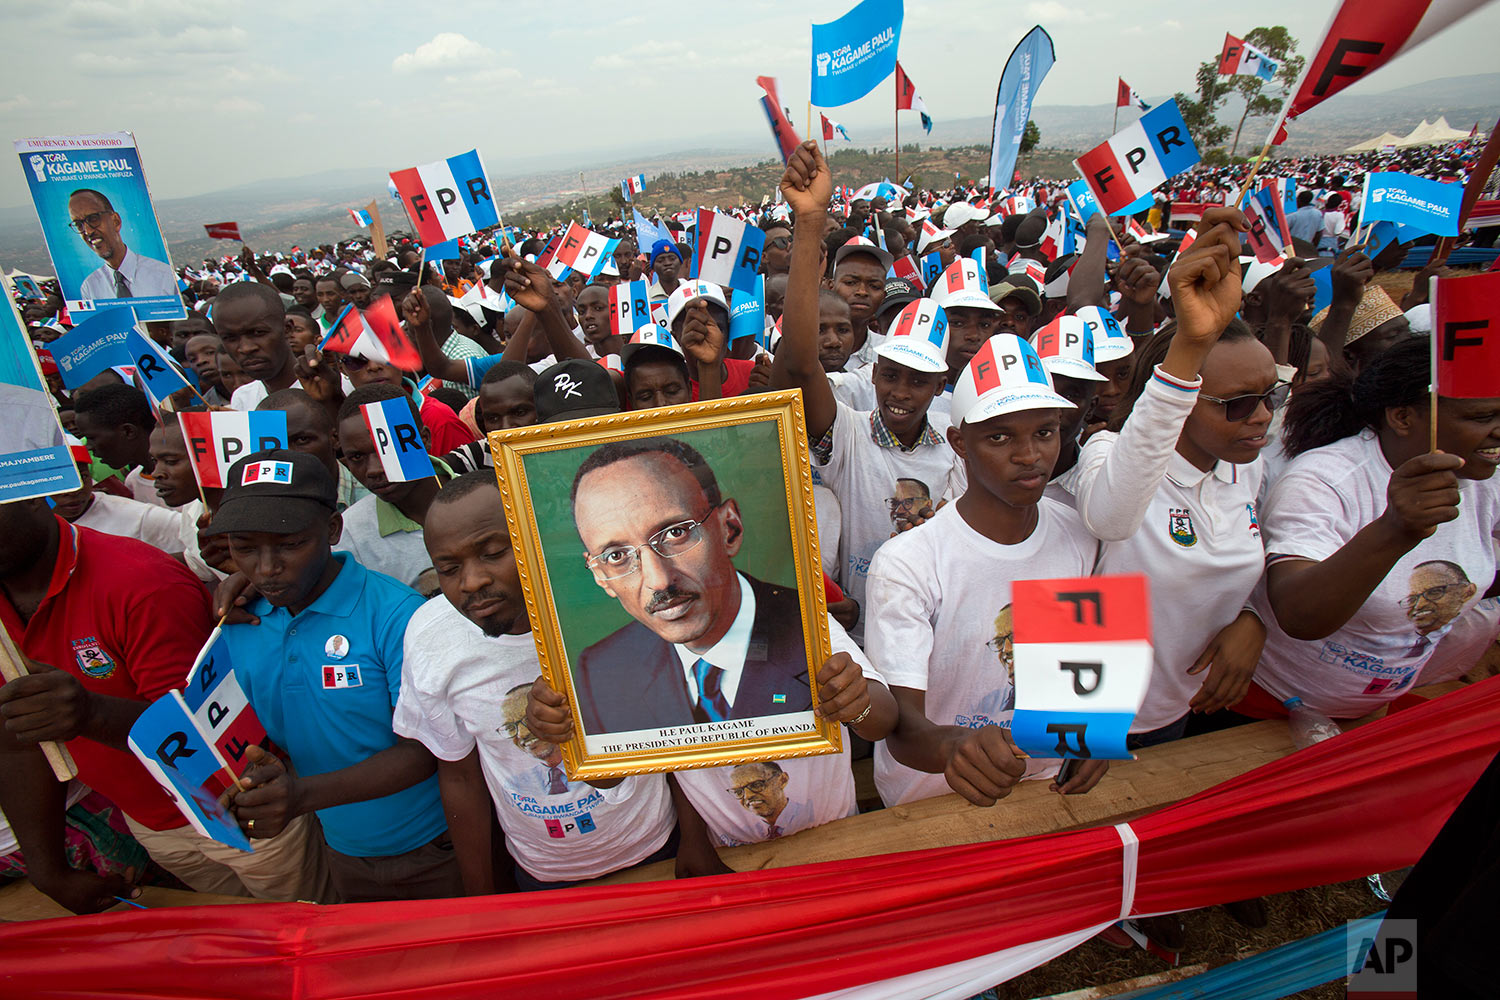  Supporters of Rwanda's President Paul Kagame, portrait center, attend an election campaign rally on the hills overlooking Kigali, Rwanda, Wednesday Aug. 2, 2017. Kagame has been in power since the end of the country's genocide in 1994 and is widely 